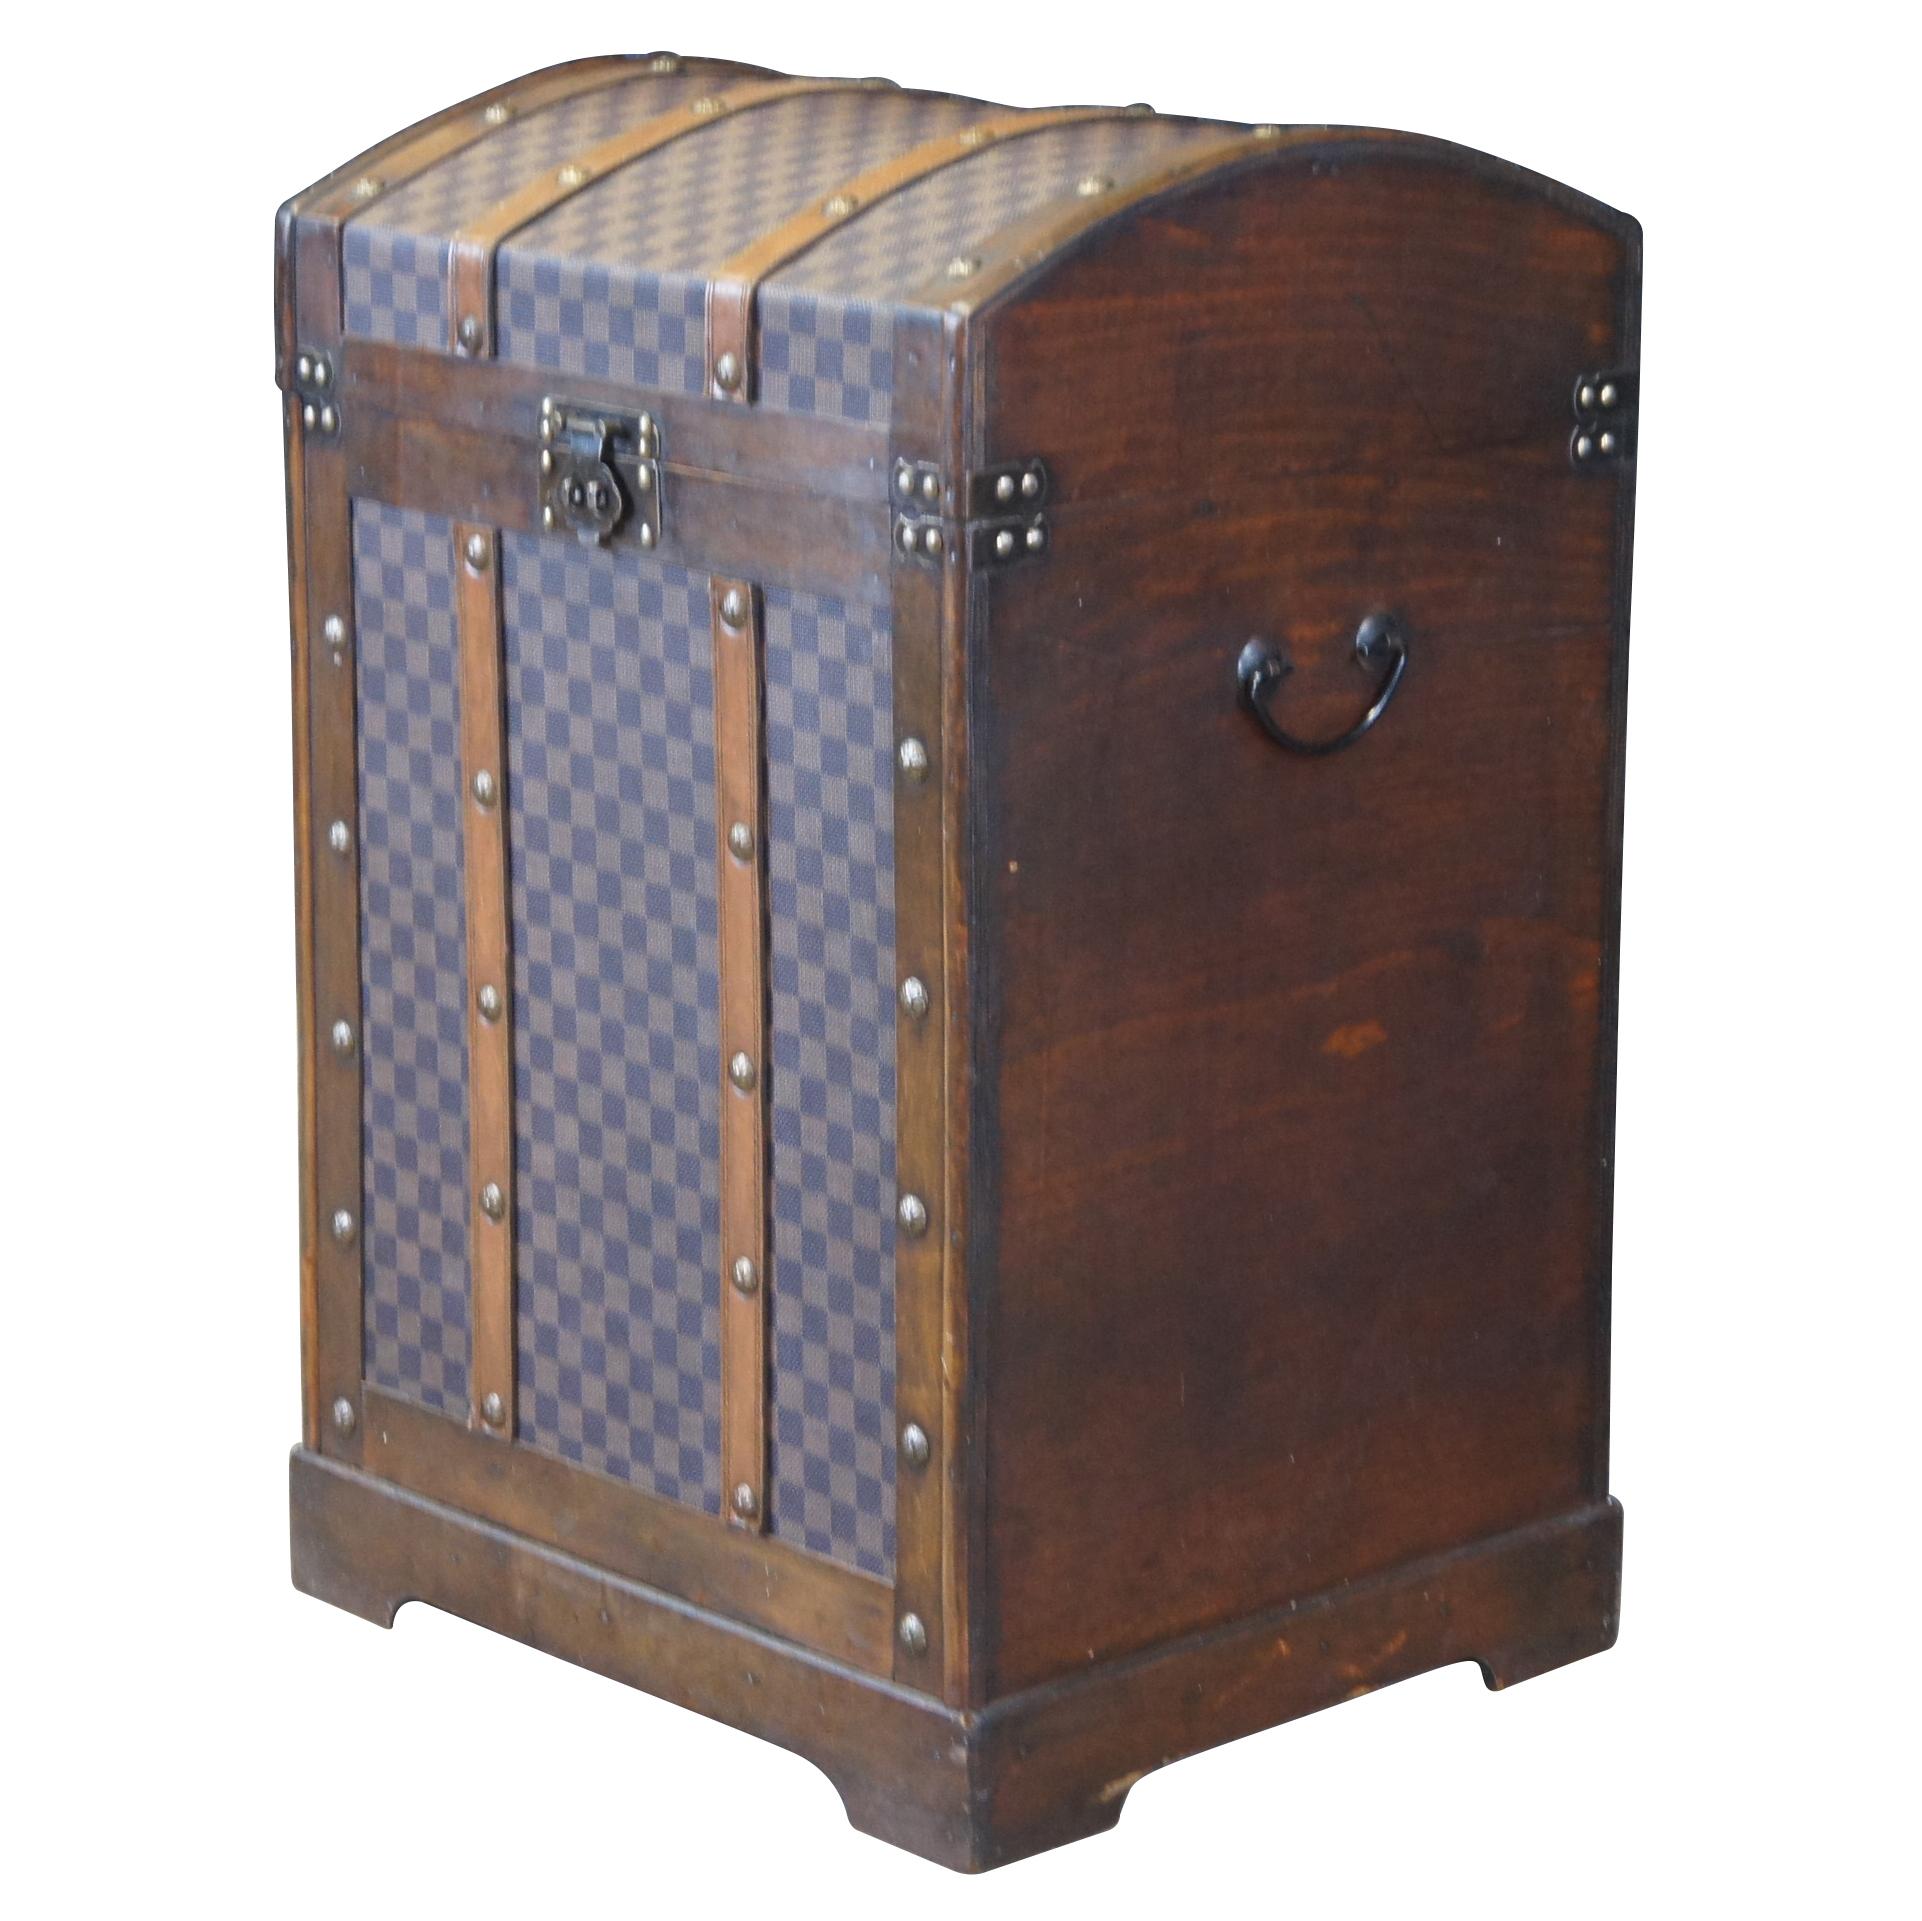 A lovely dome top storage trunk. Features a tall form with a framed wood exterior, faux leather monogrammed canvas and metal hardware. Great for display or storage.  Size: 28